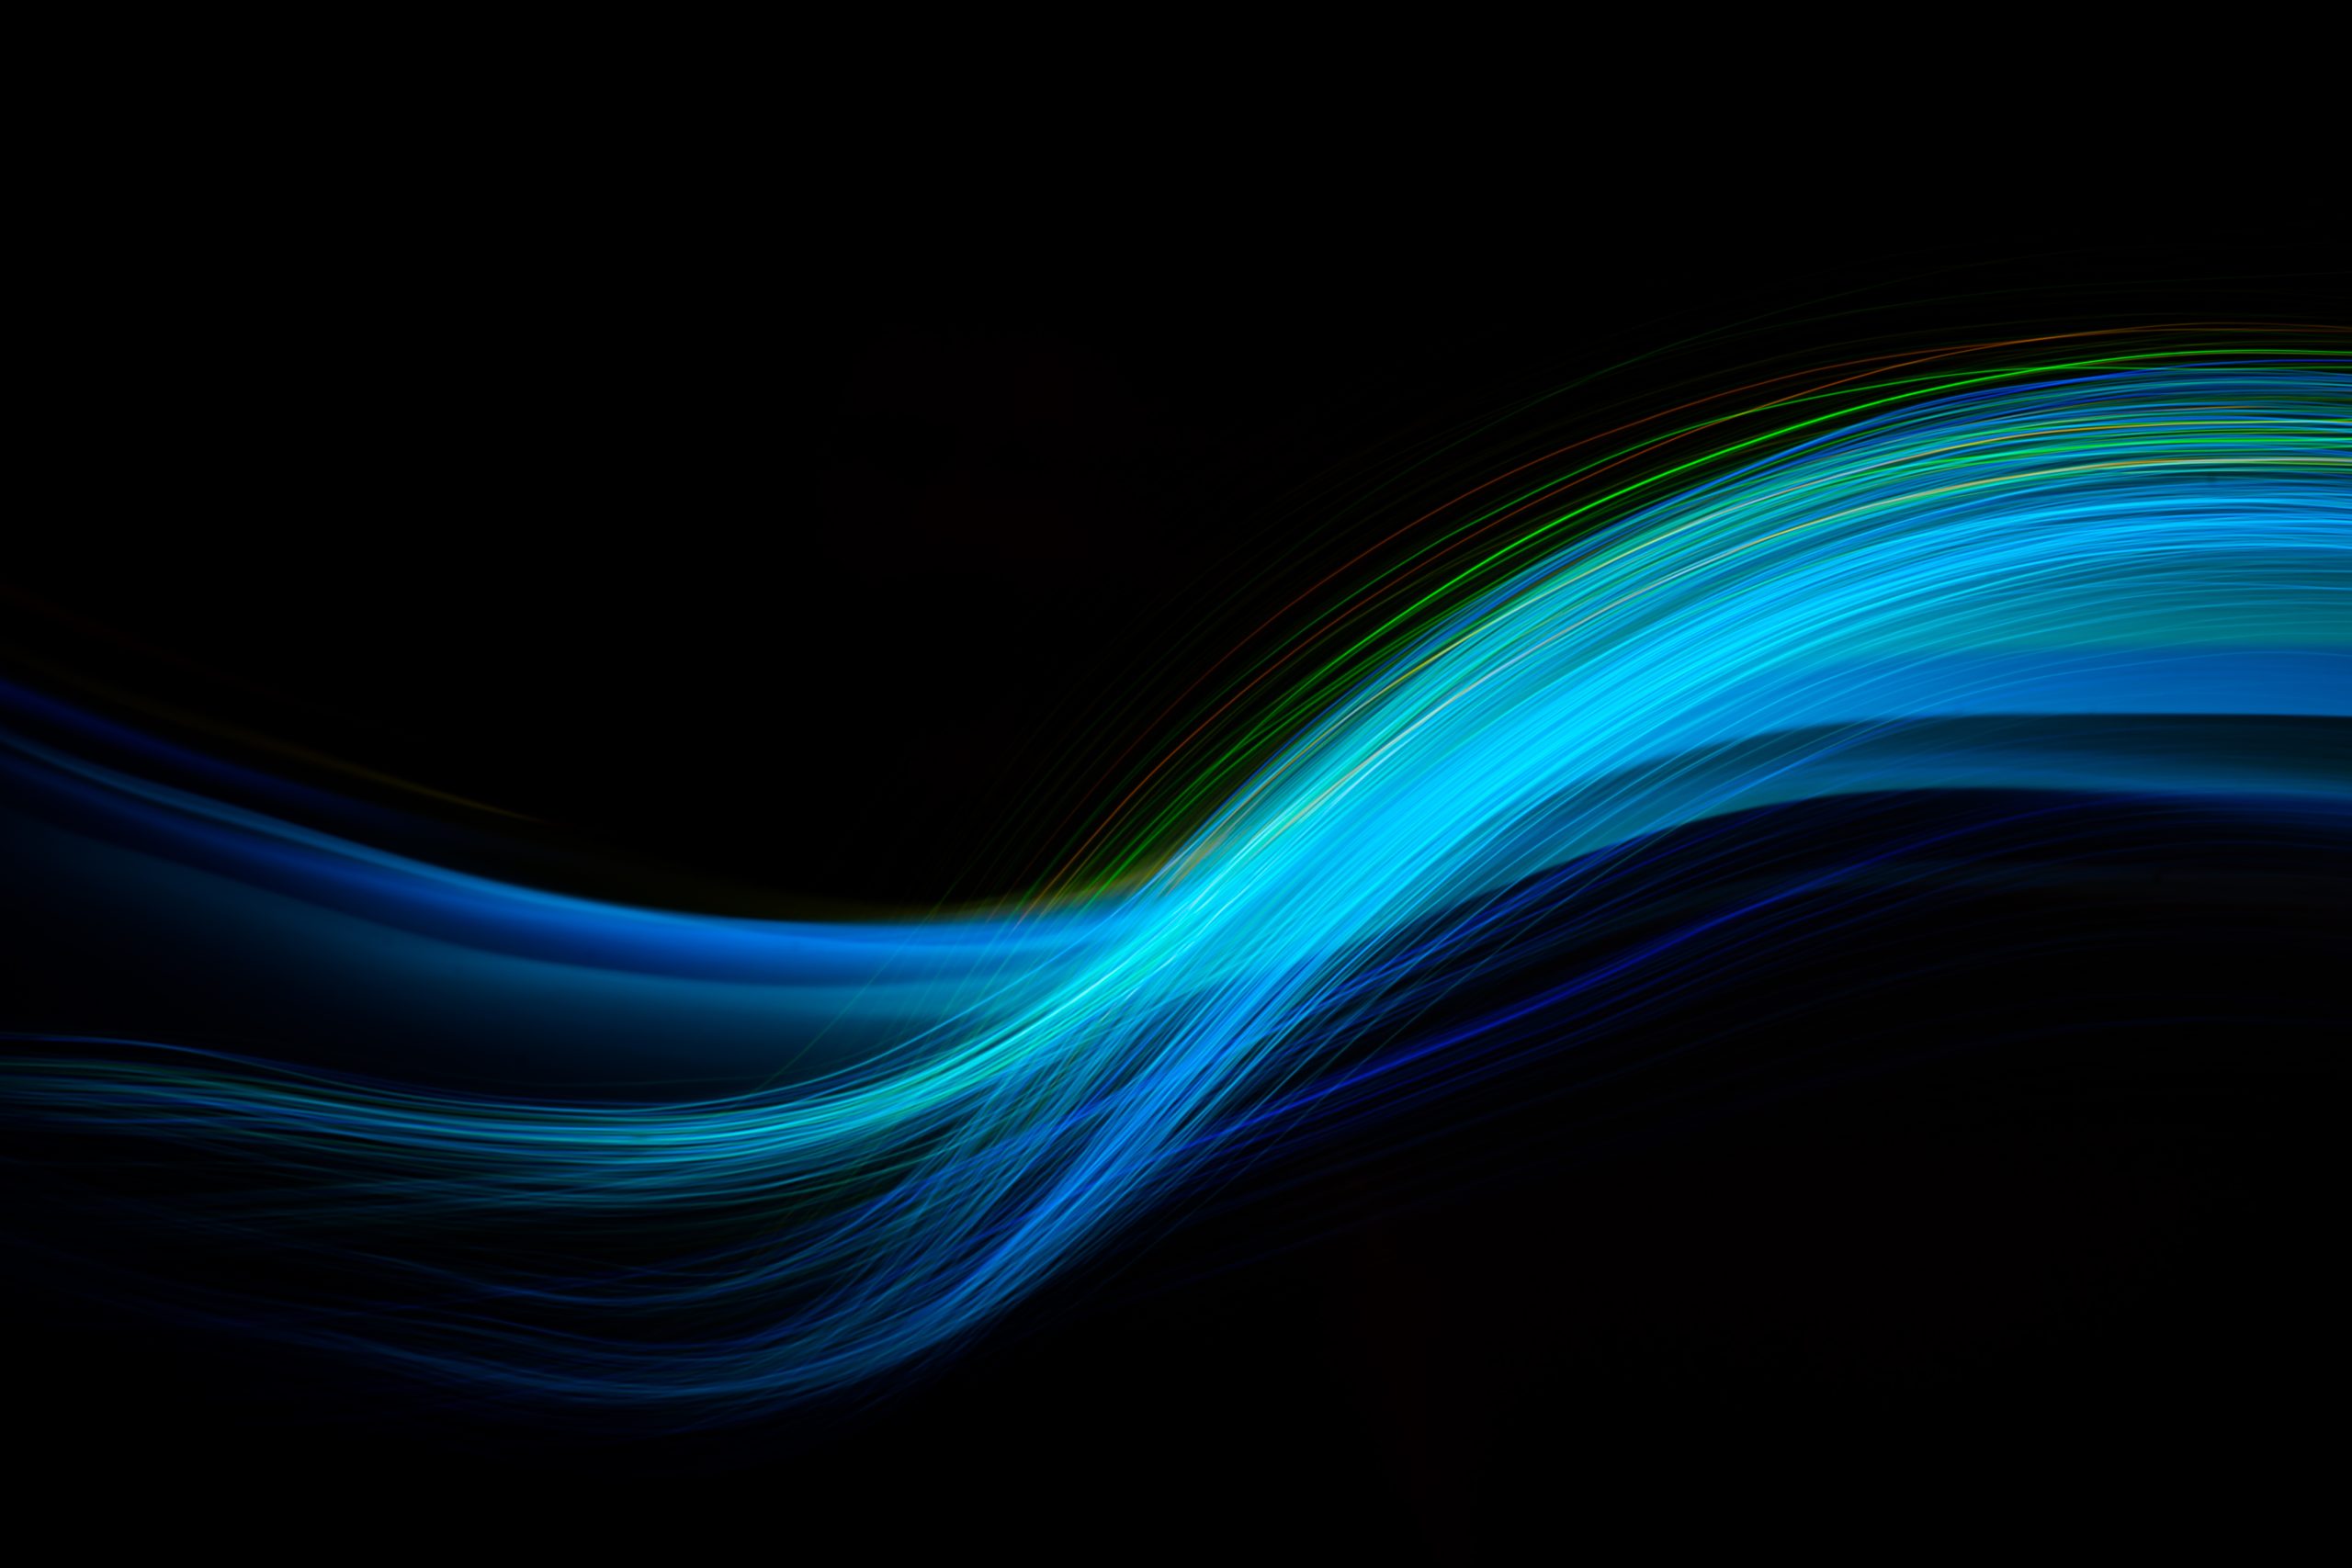 Neon technology stripes. Digital blue and green lines waves on black background. High quality photo